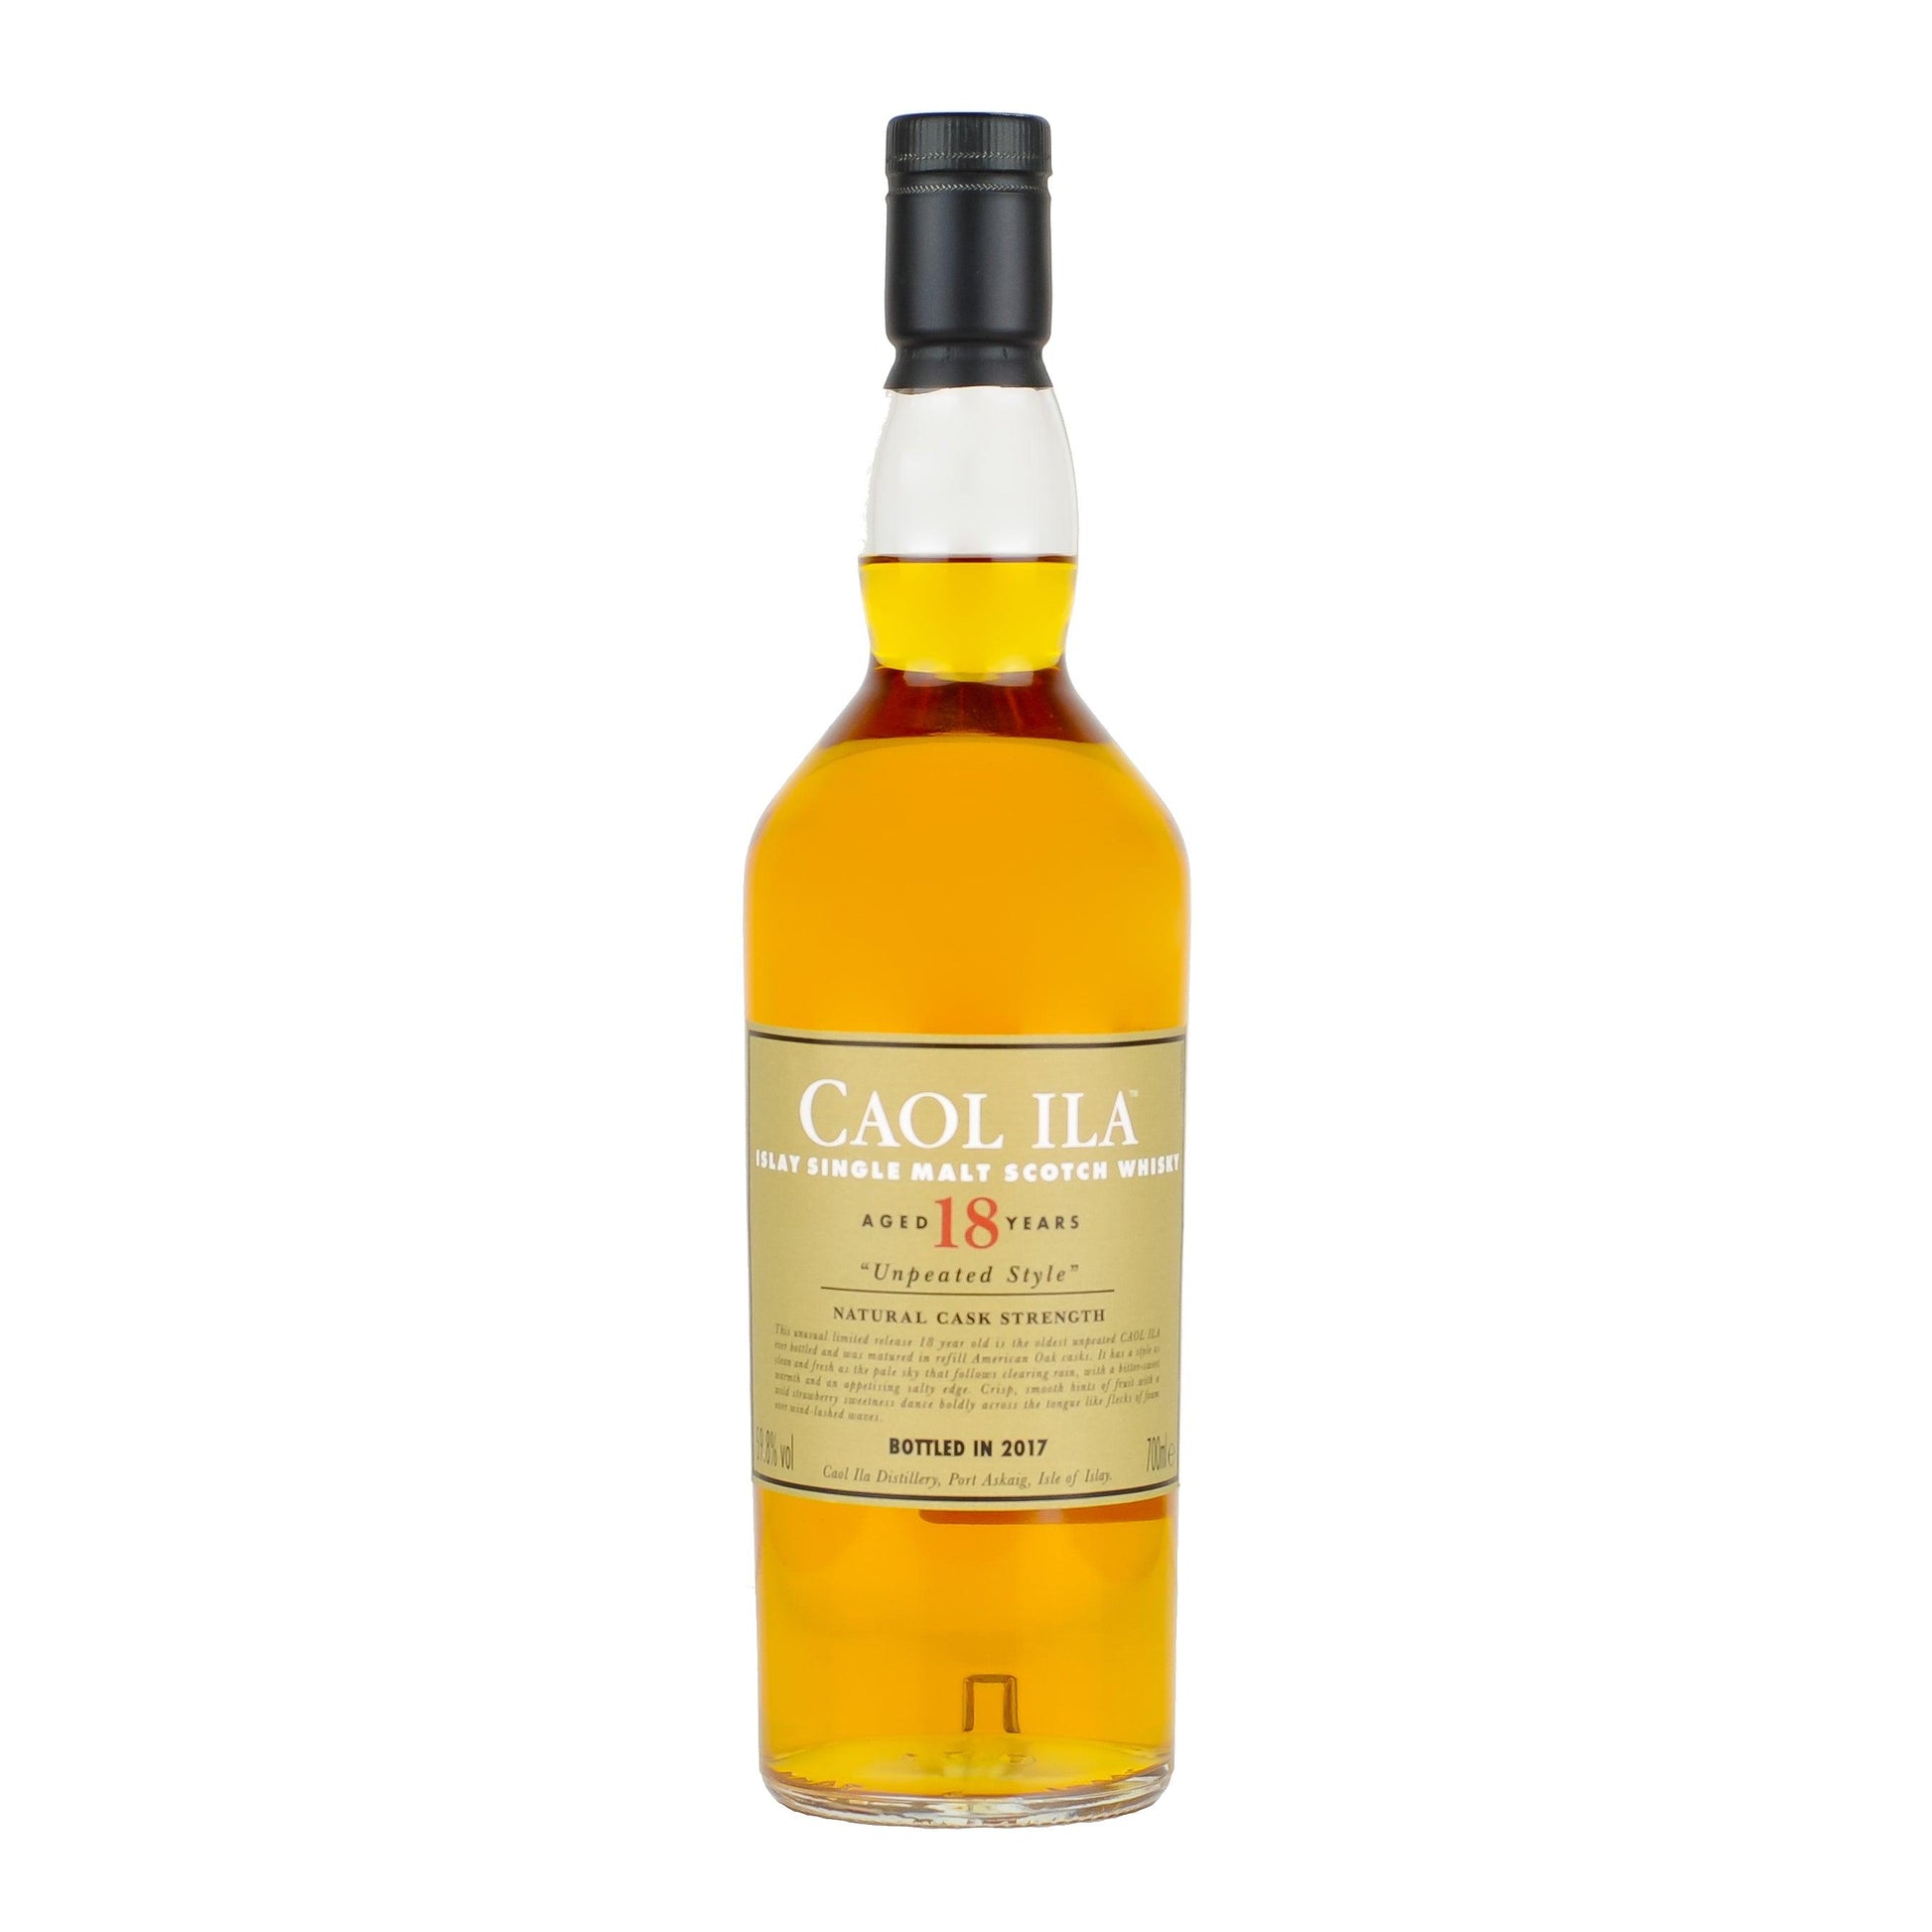 Caol Ila 18 Years Old Unpeated Style - Whisky Grail